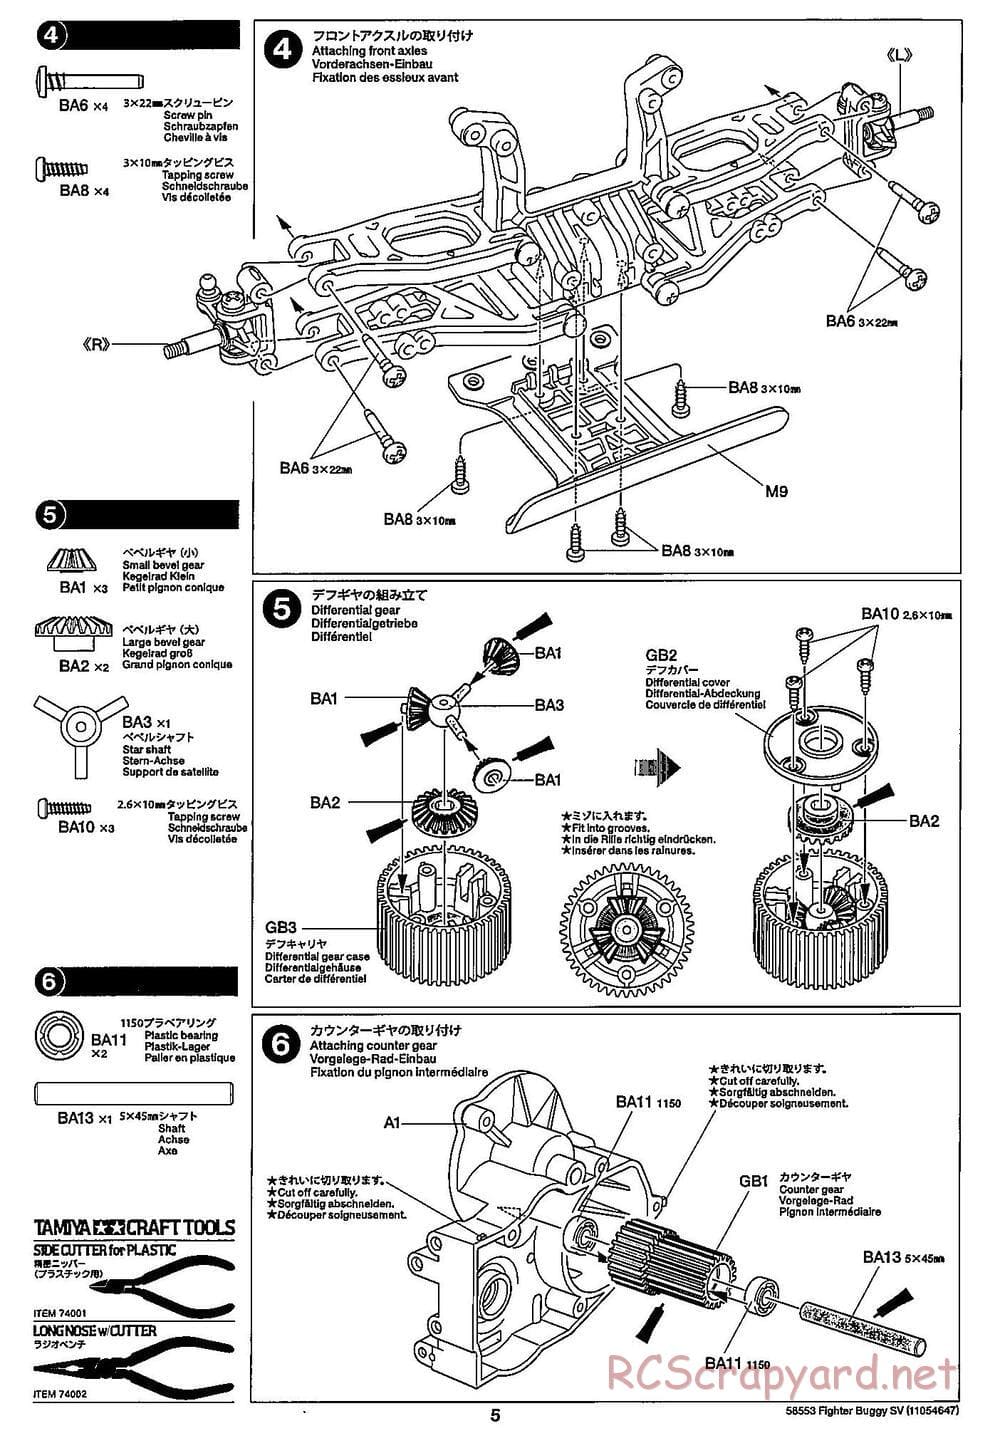 Tamiya - Fighter Buggy SV Chassis - Manual - Page 5